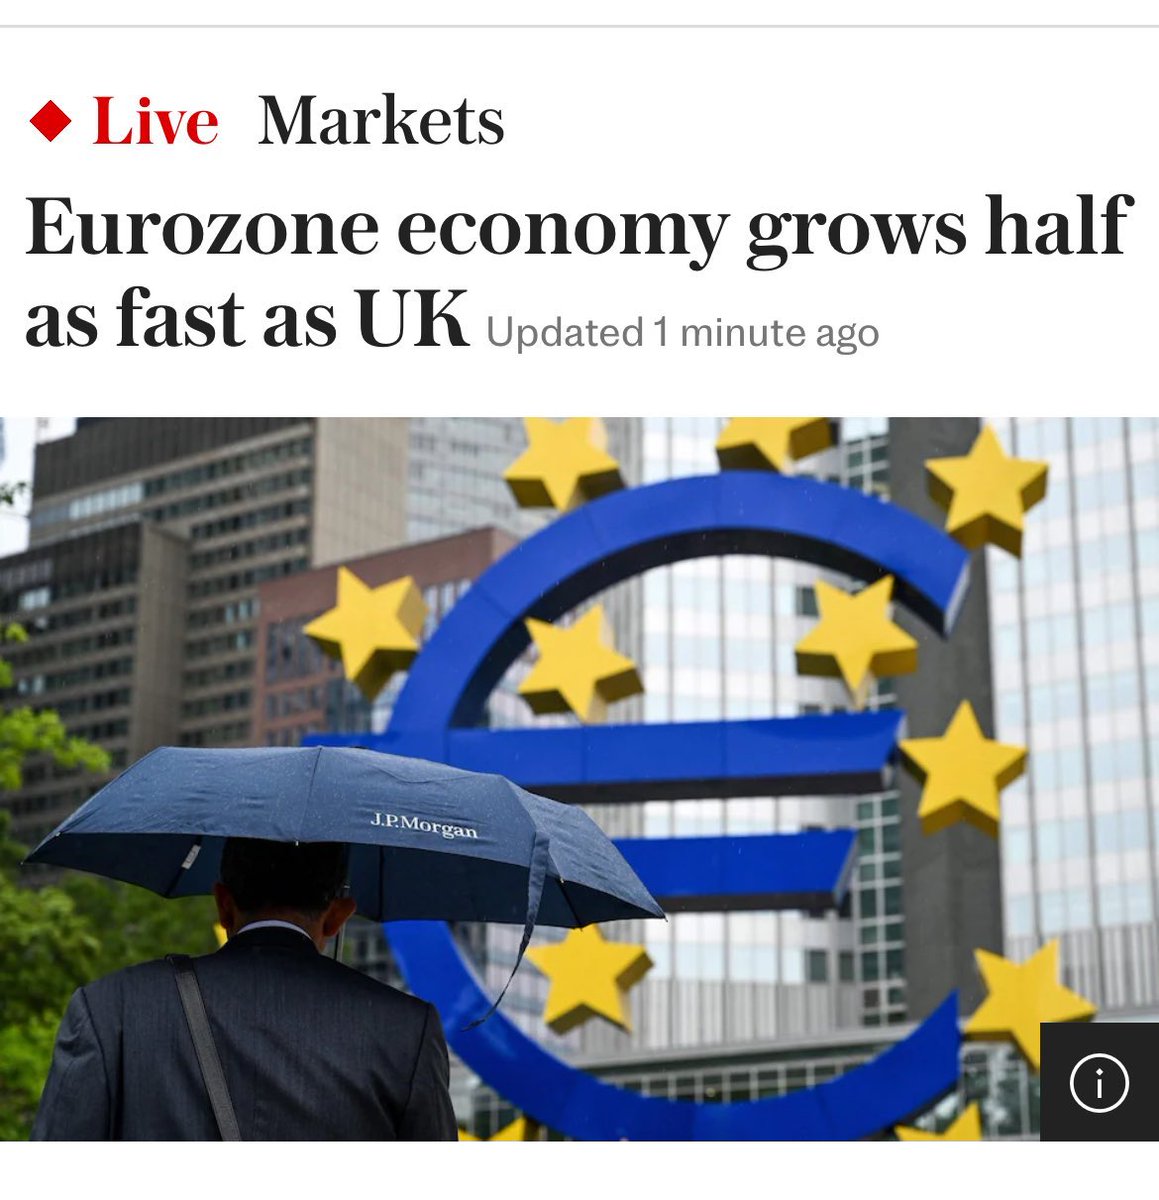 They can’t even bring themselves to say the UK economy “grew twice as fast” as the Eurozone.

It’s so utterly blatant and manipulative by the MSM.